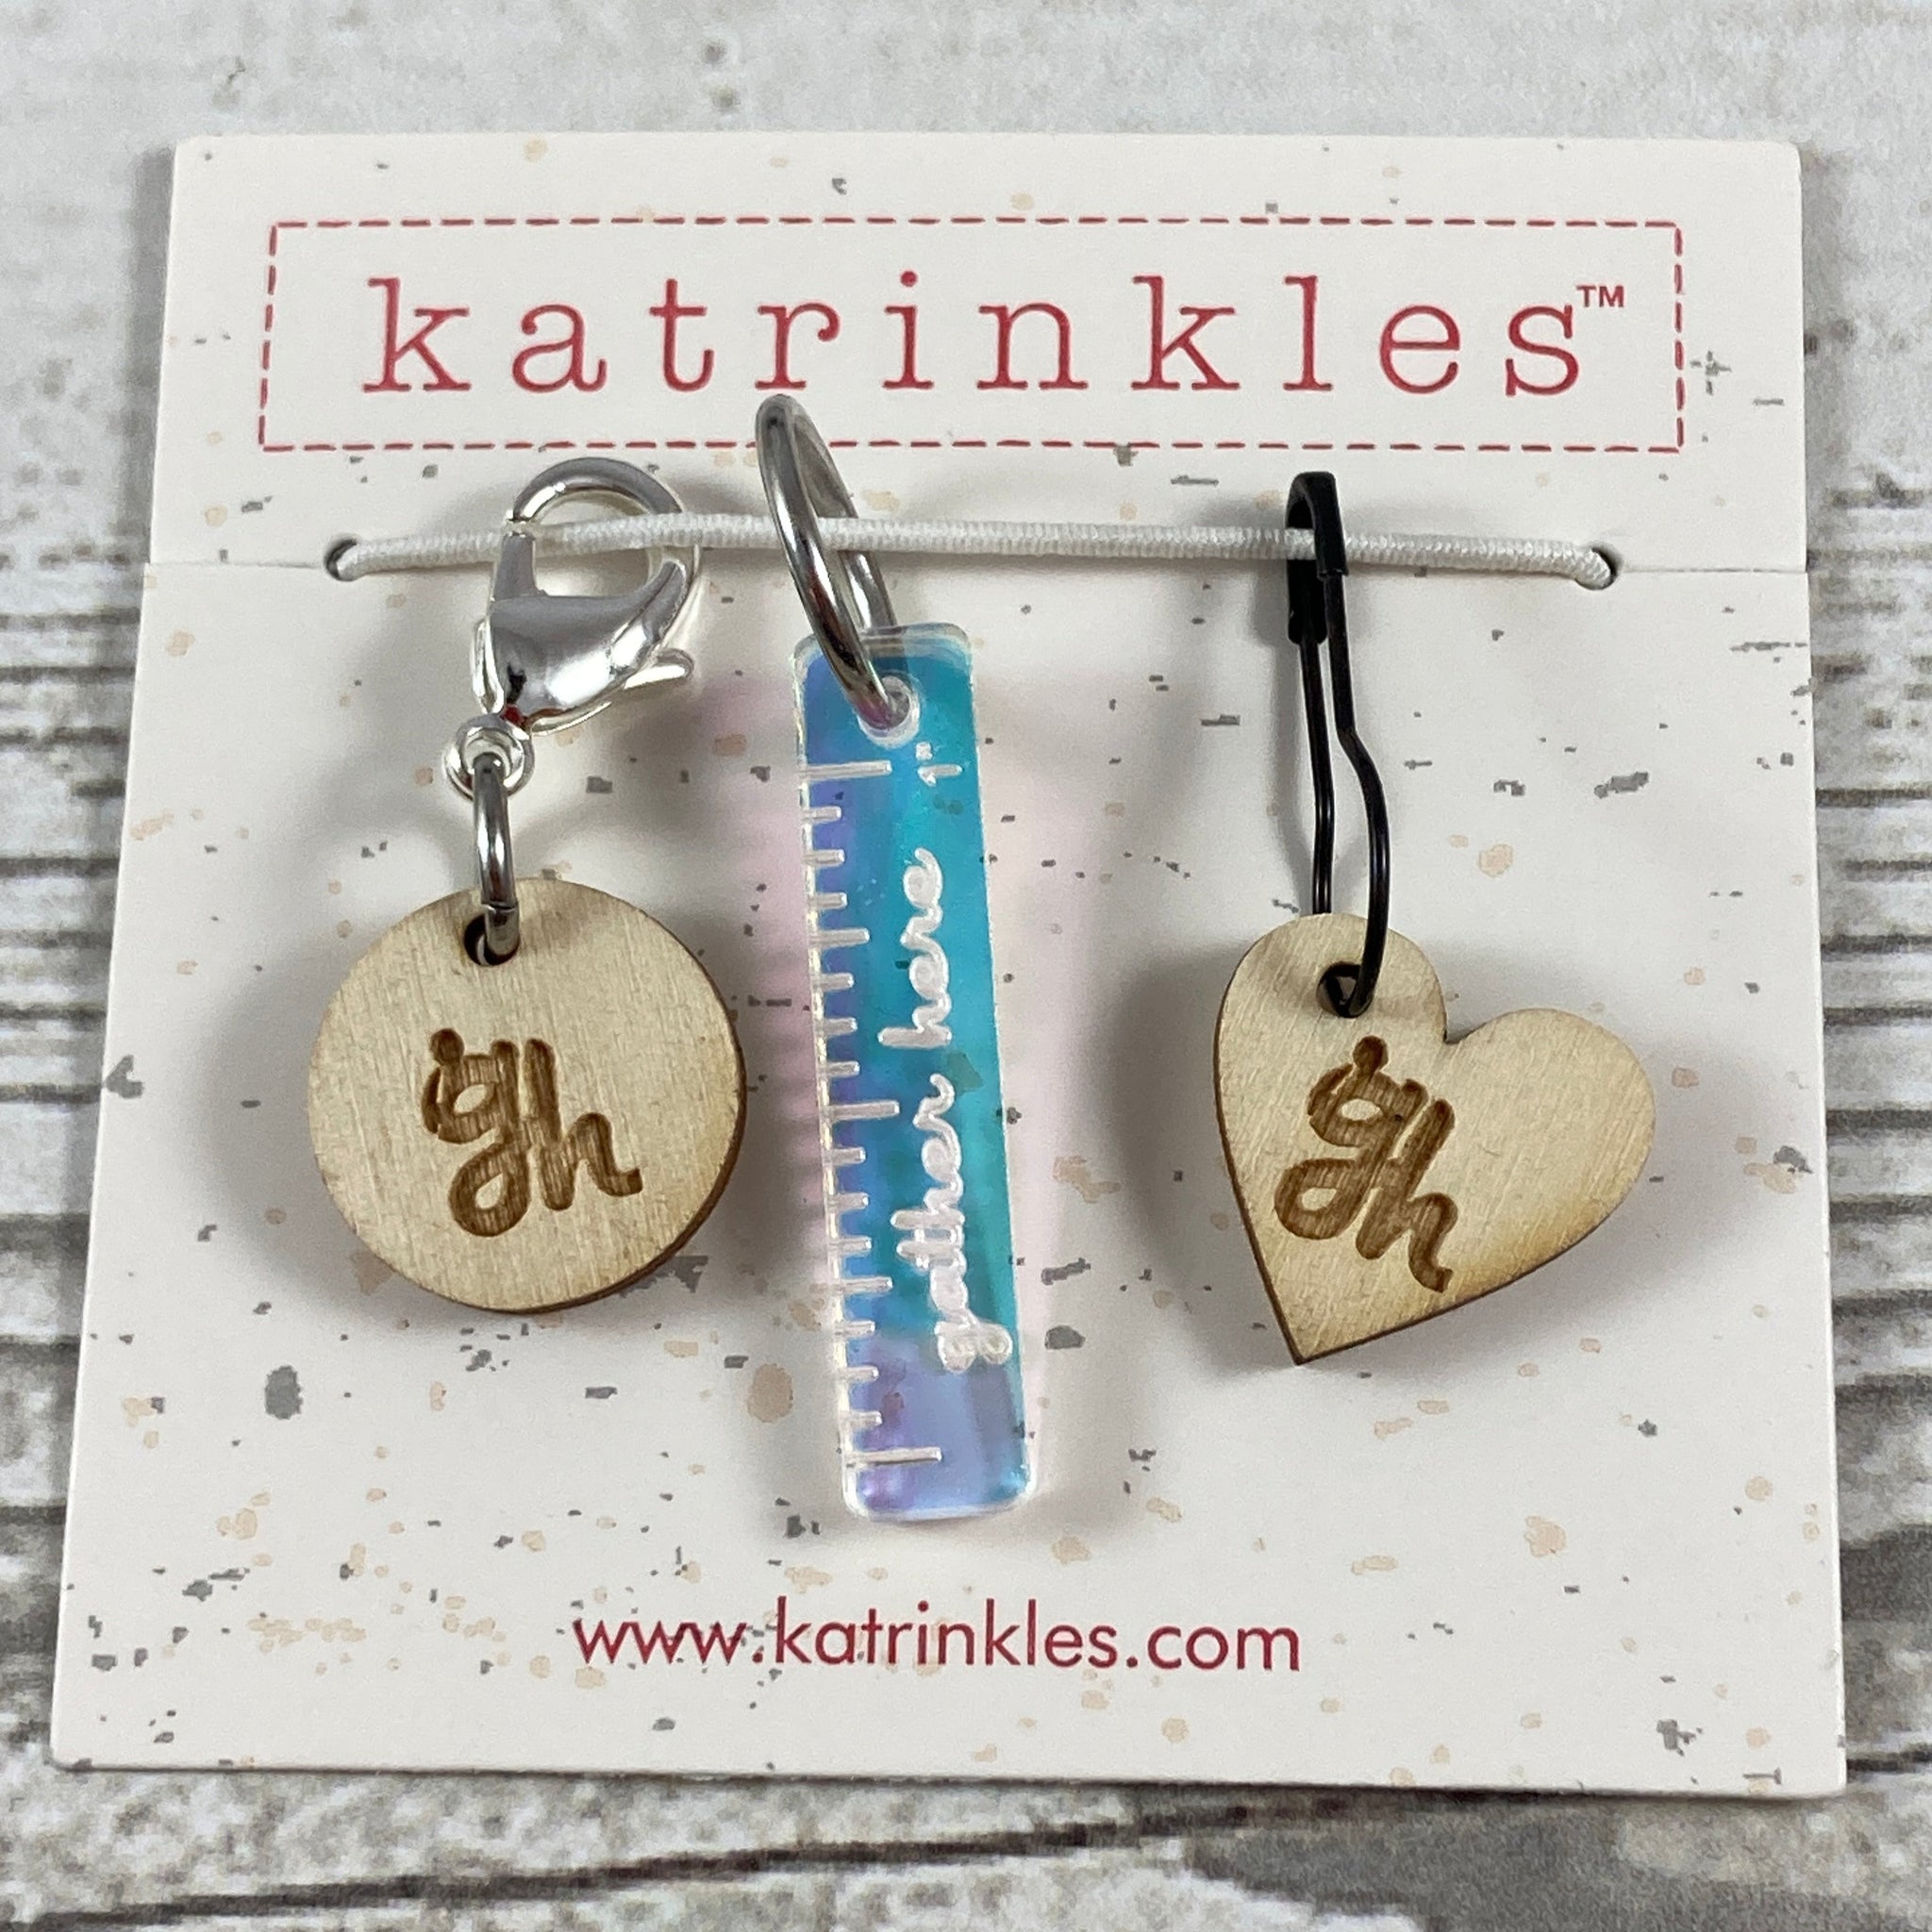 Katrinkles-Gather Here Card of 3 Stitch Markers-notion-gather here online